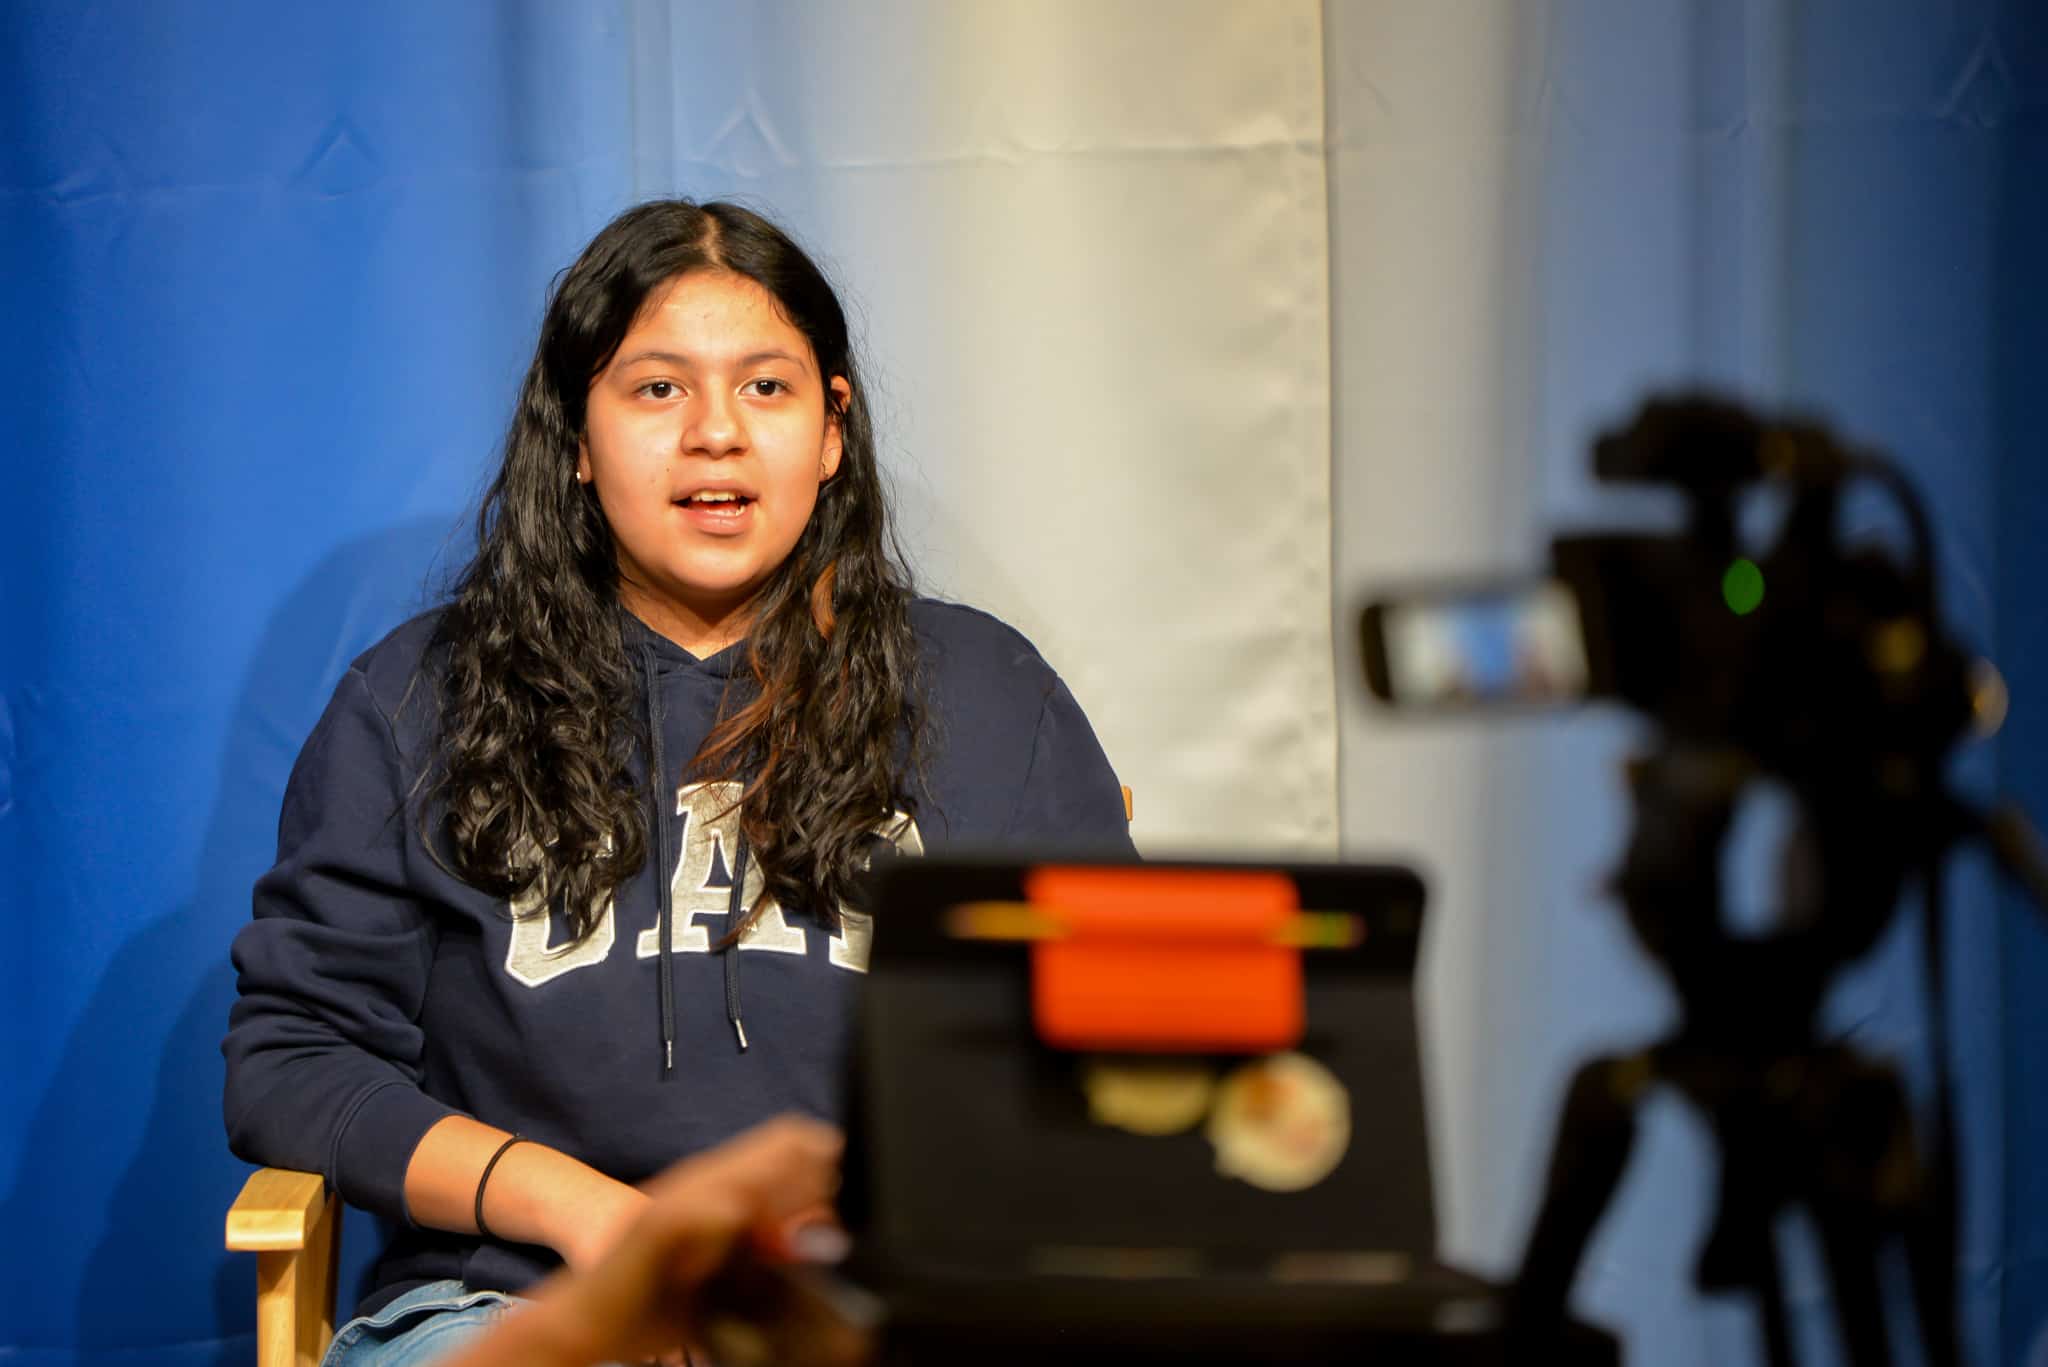 Female middle school student sitting on a chair in front of a camera. She is talking on camera during a newscast that is being recorded.